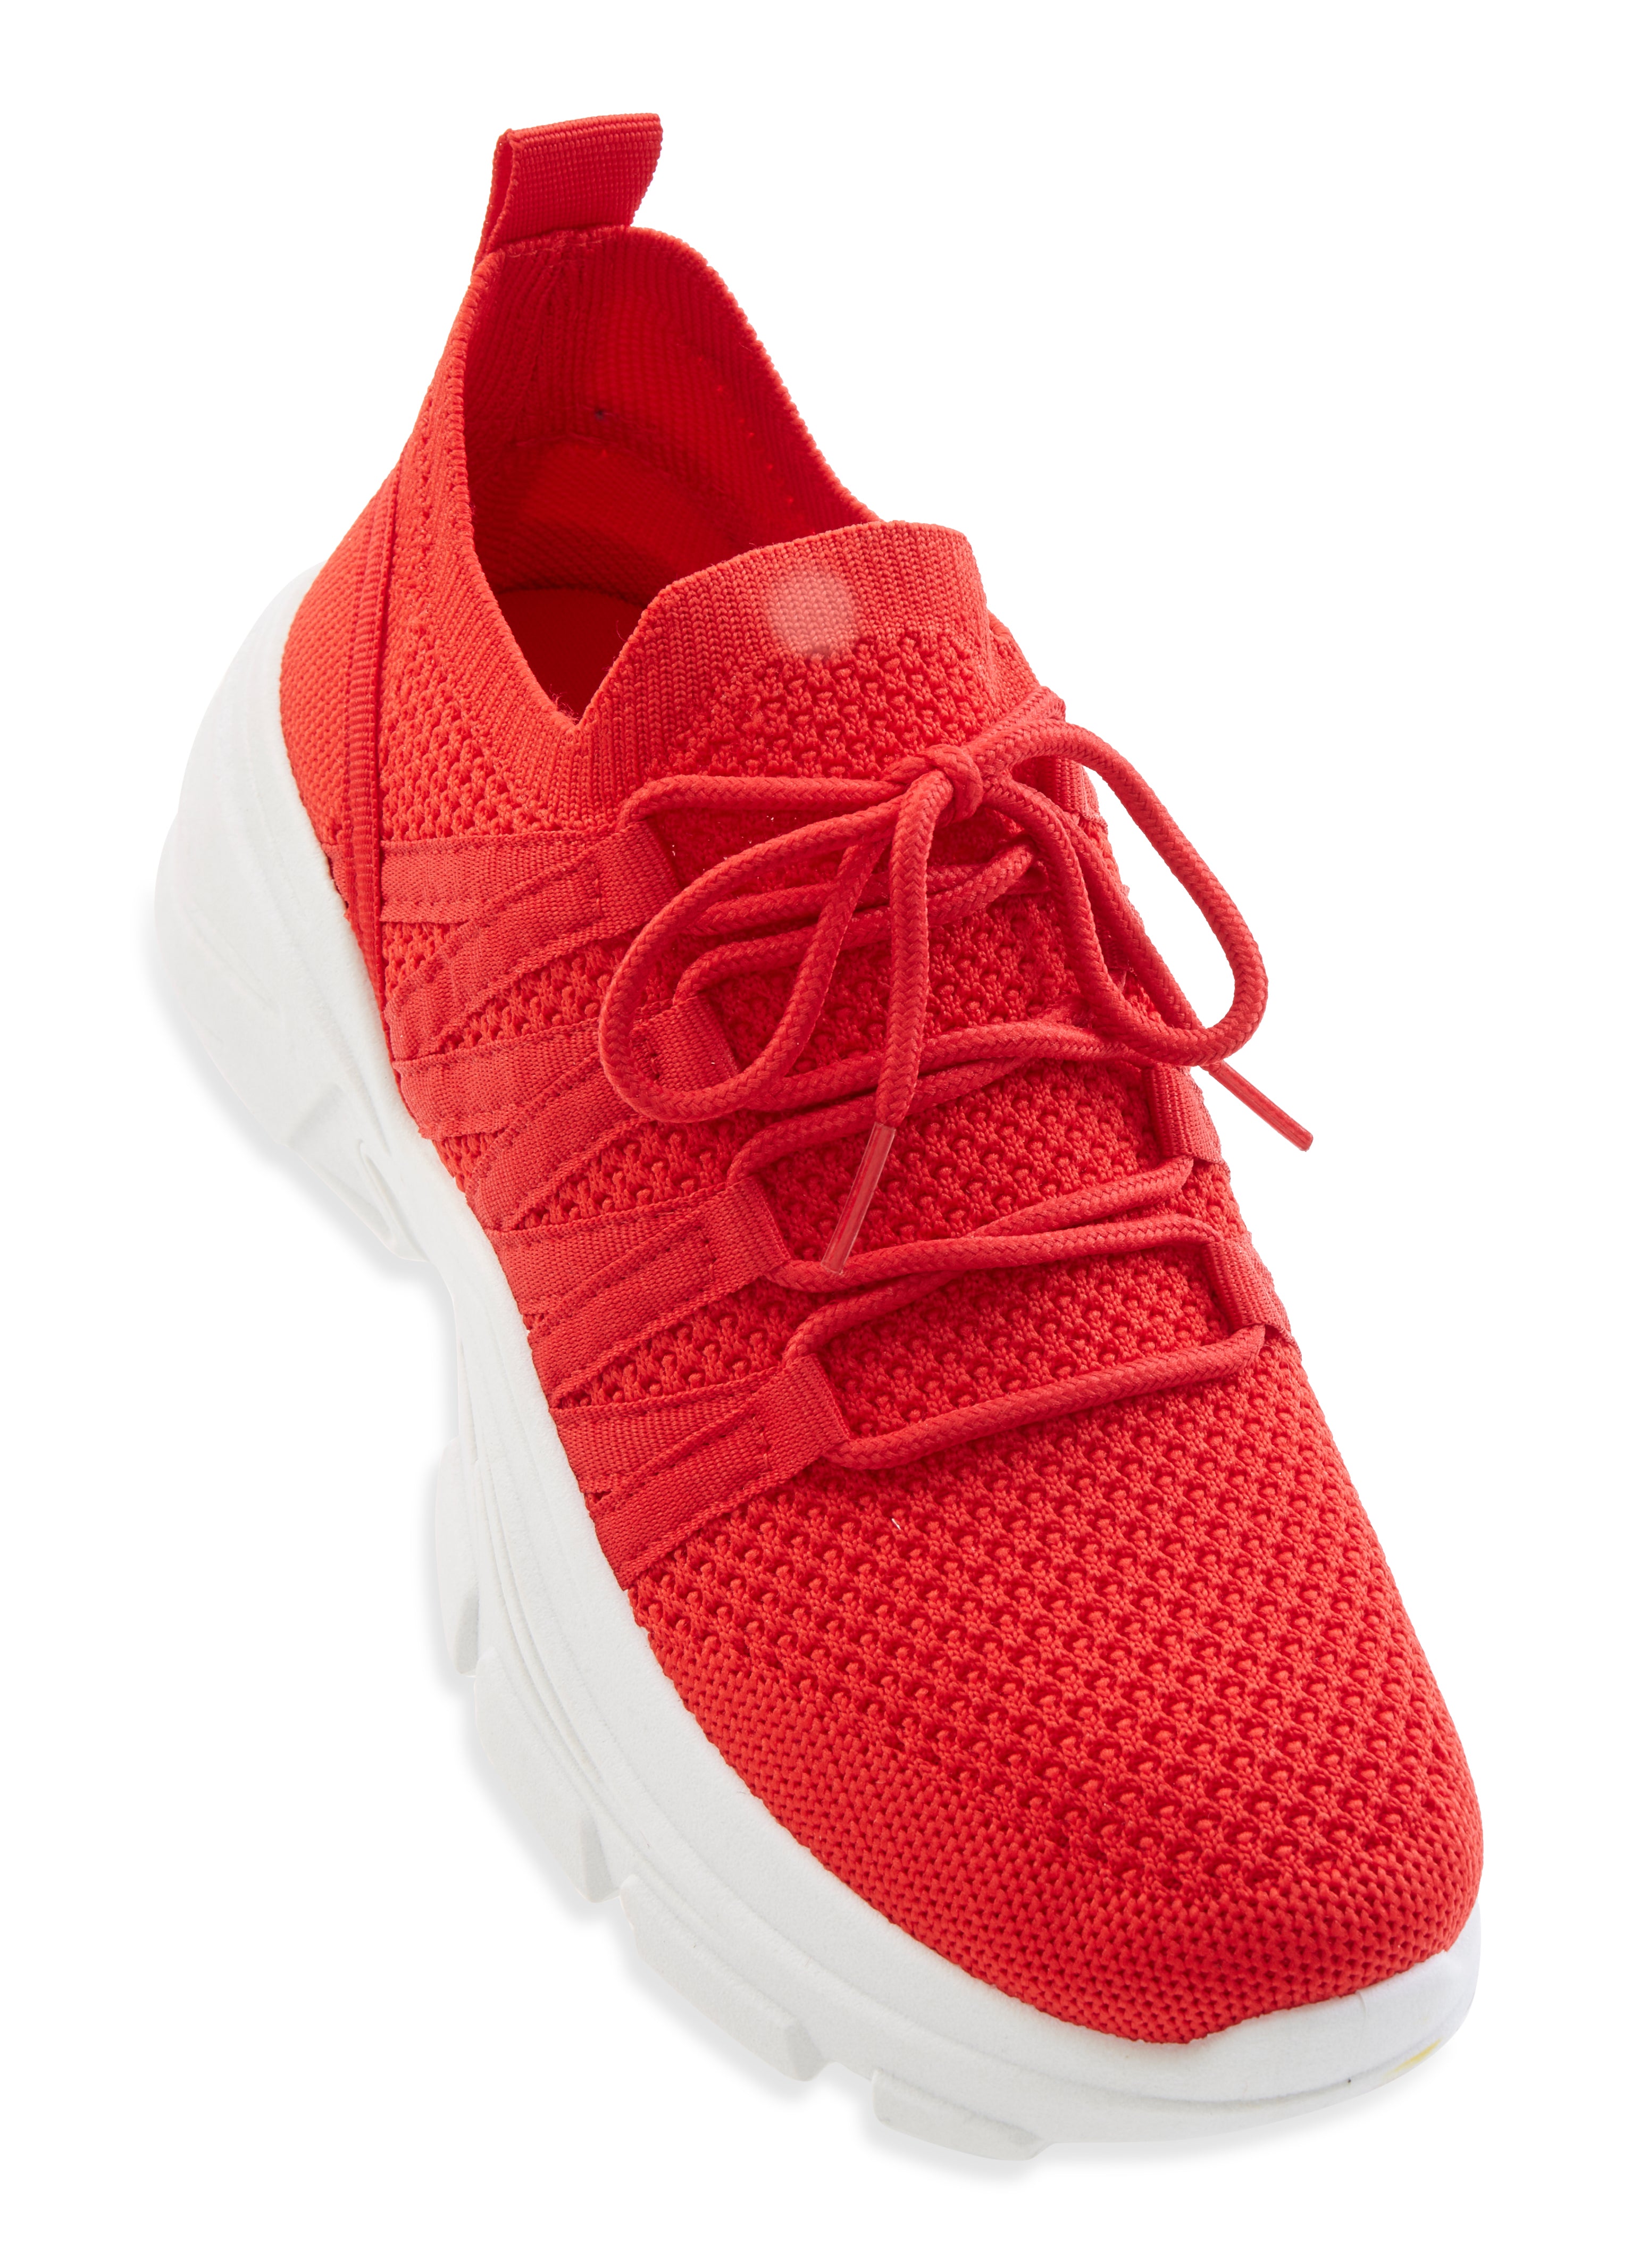 Red Shoes - Buy Red Color Shoes Online